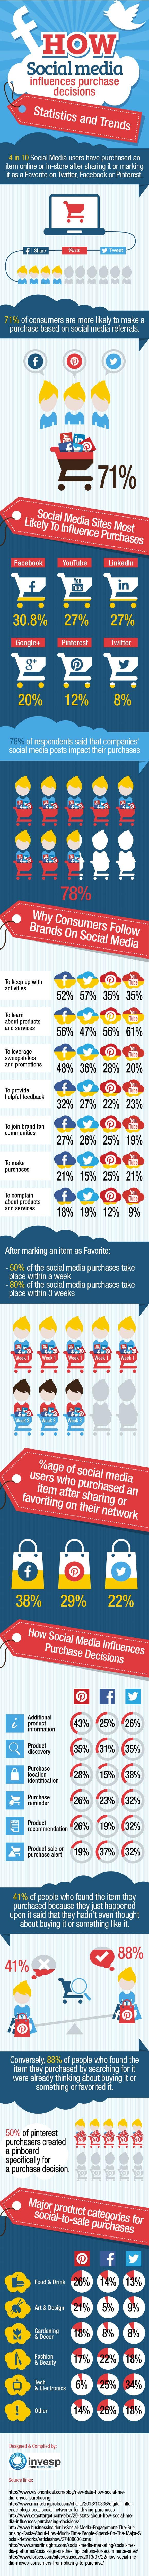 How-To Attract More Customers Trough Social Media [INFOGRAPHIC]